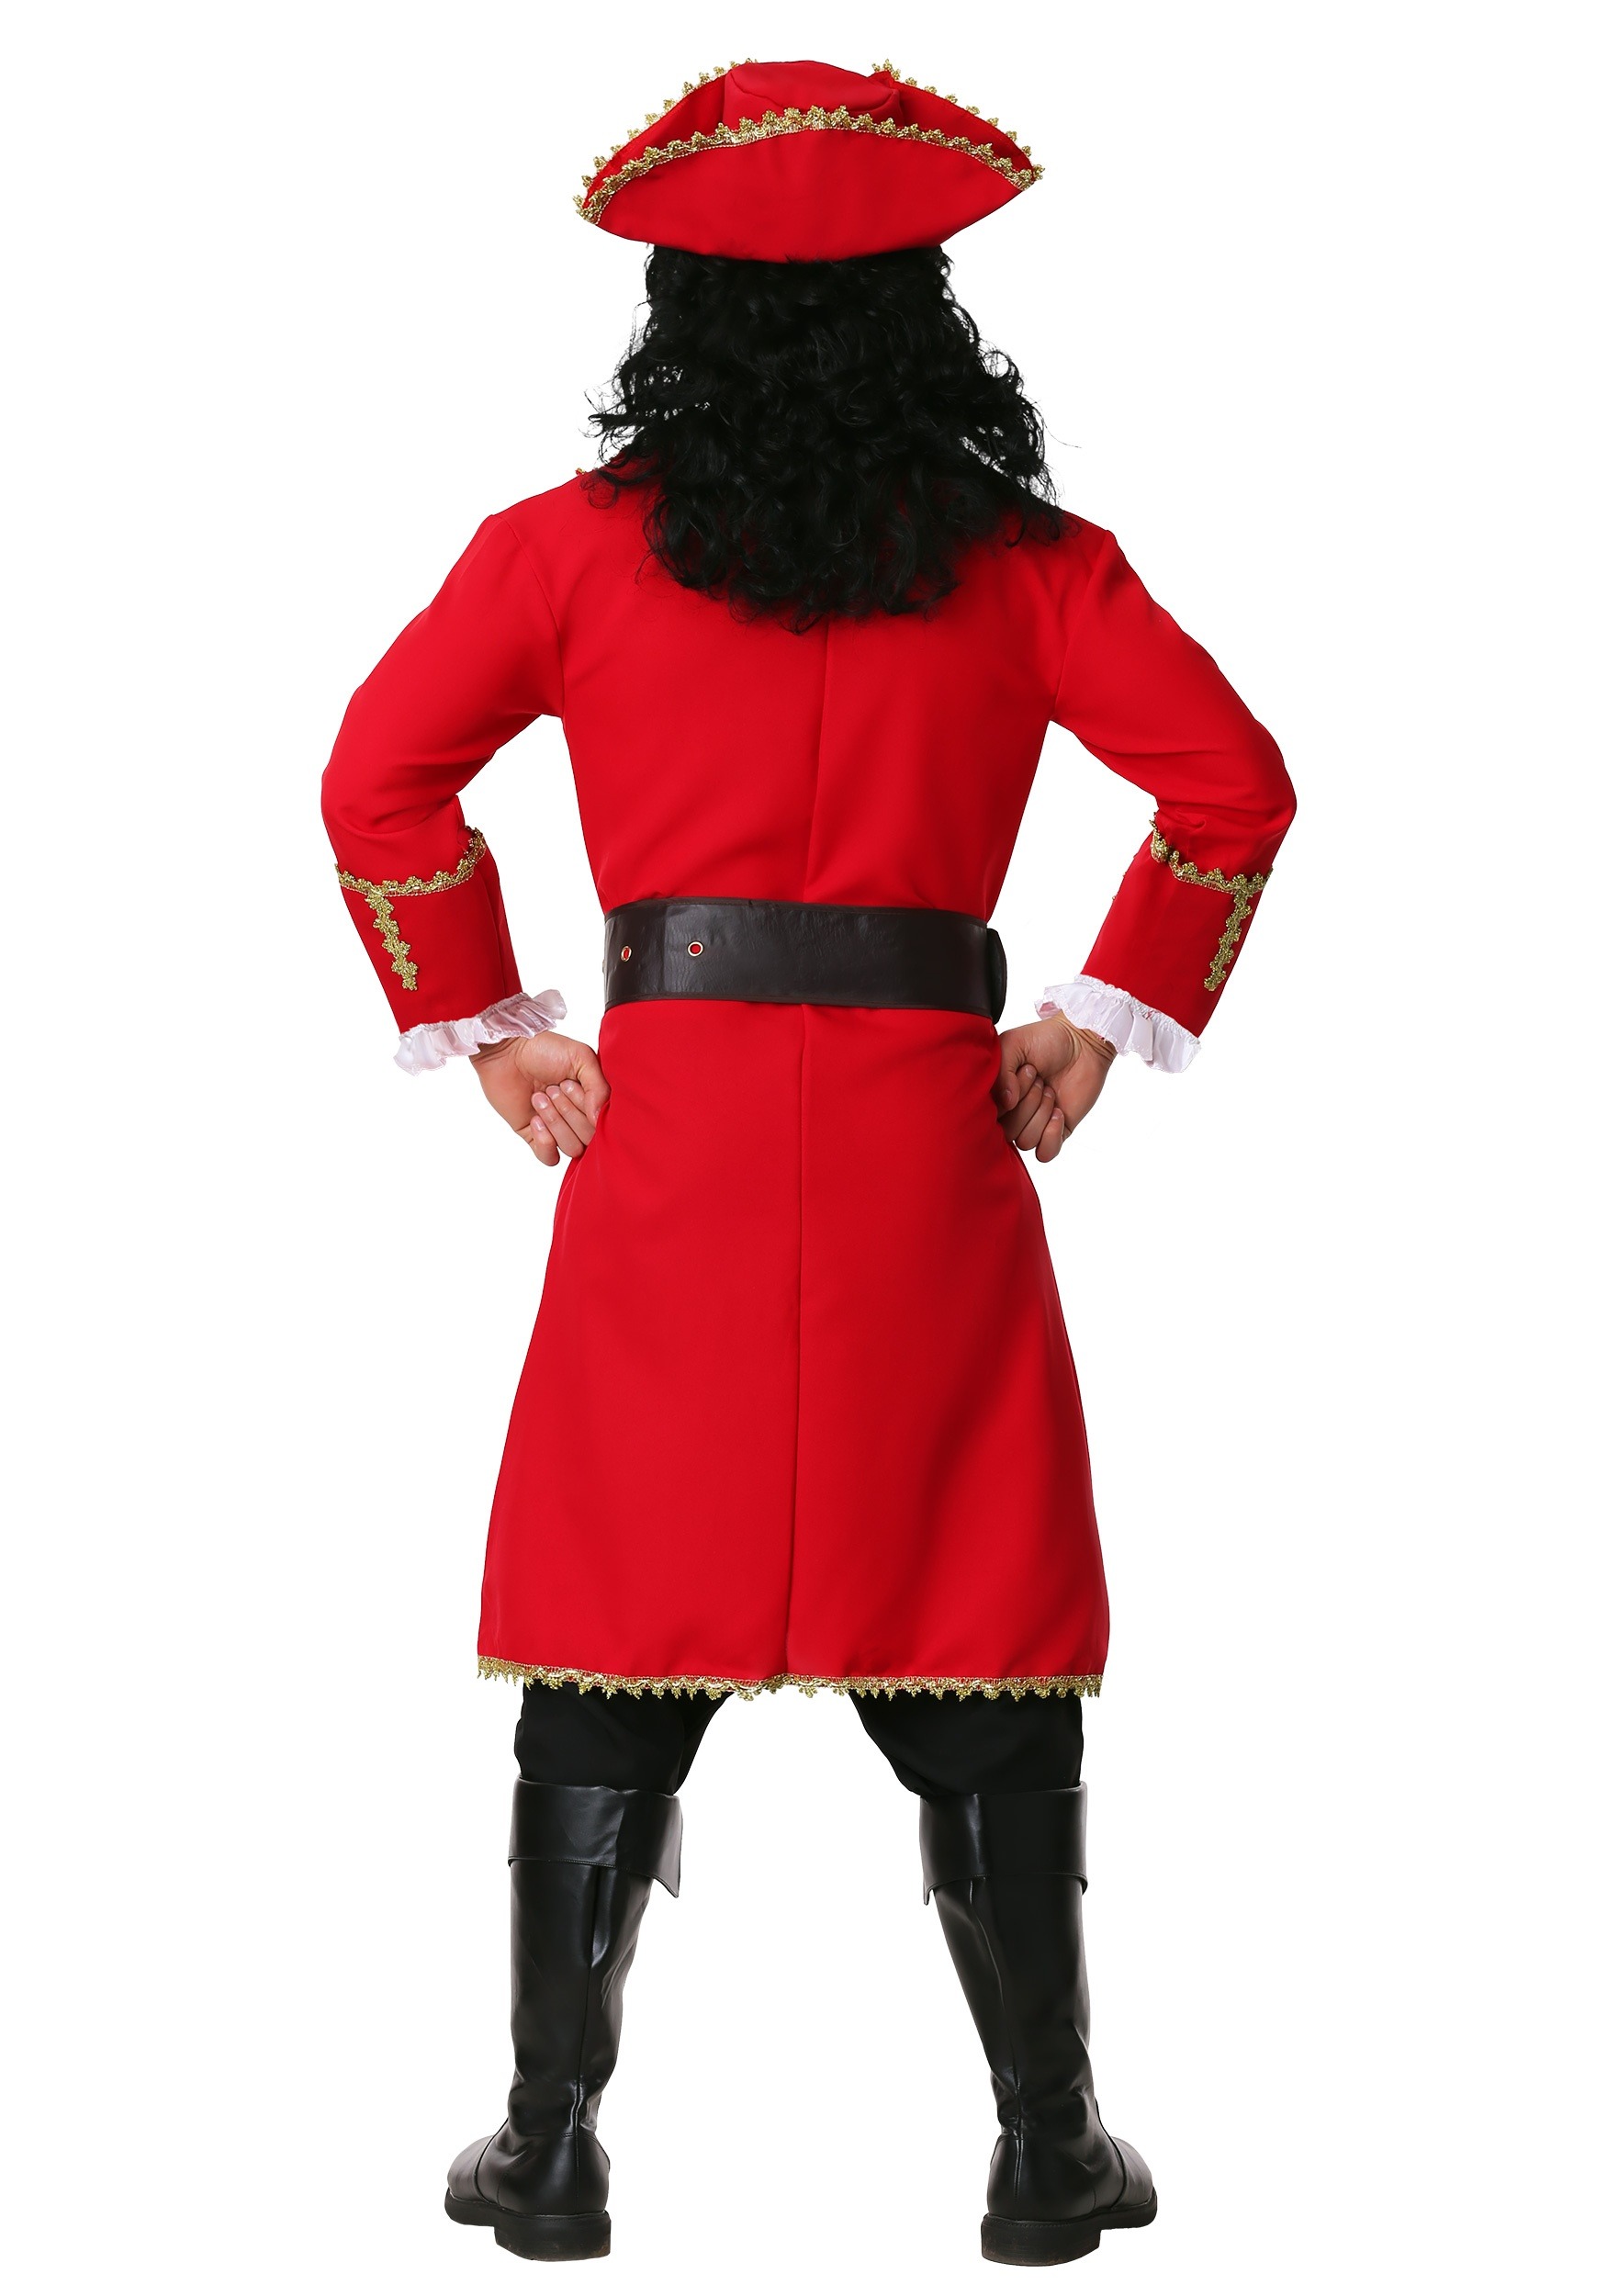 Captain Blackheart Pirate Fancy Dress Costume - Red Pirate Jacket